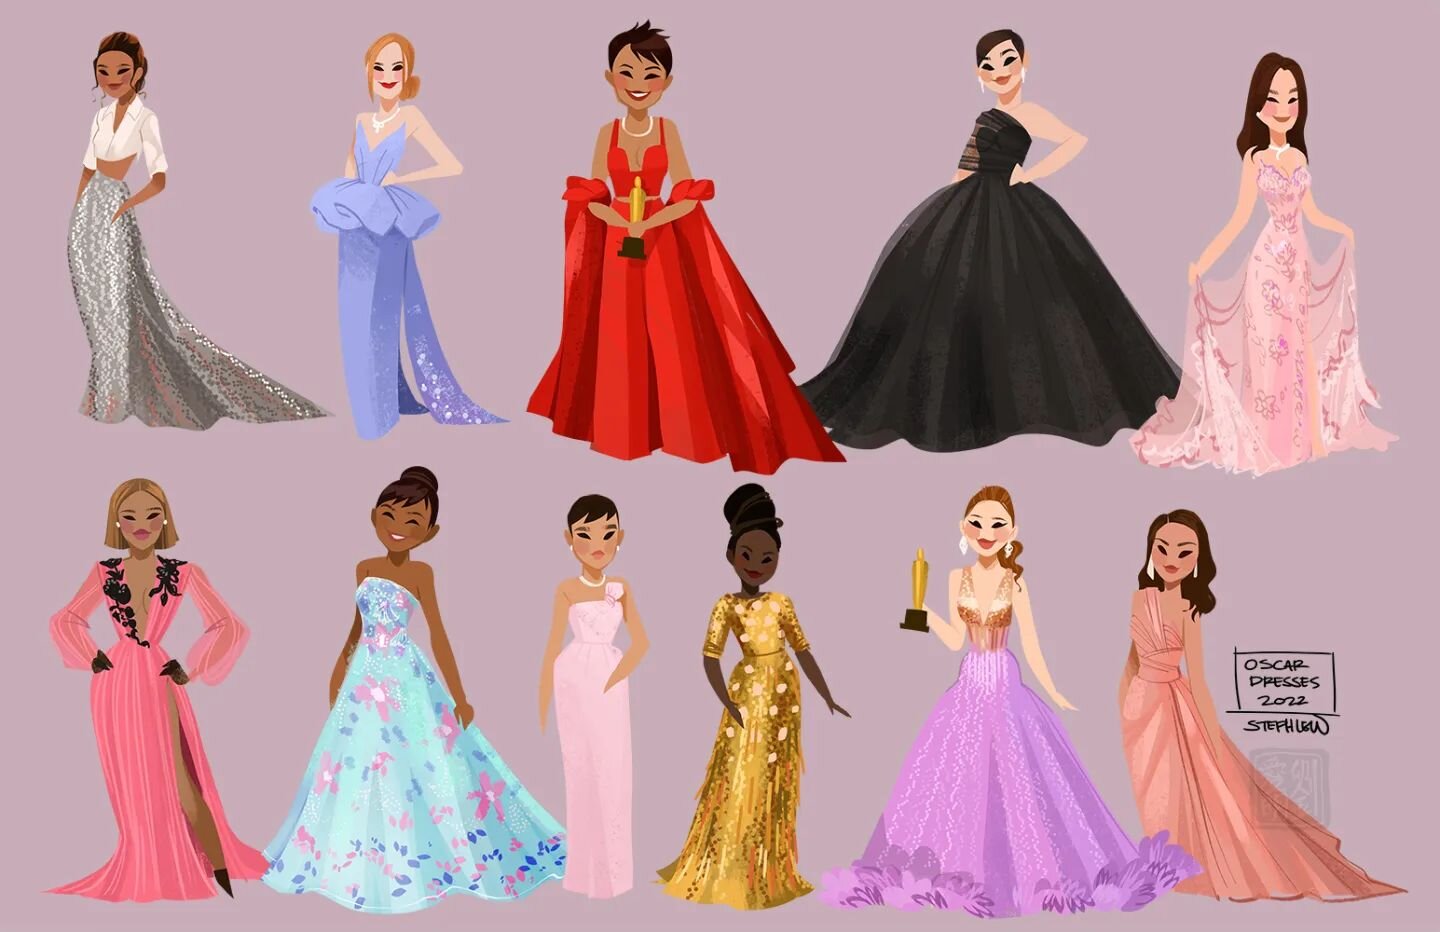 Some Oscar dresses for 2022! No standout favorites for me this year. Also totally forgot it was Oscar night! This year the doodles are a little rougher and quick! #stephlew #photoshop #oscars #dresses #illustration